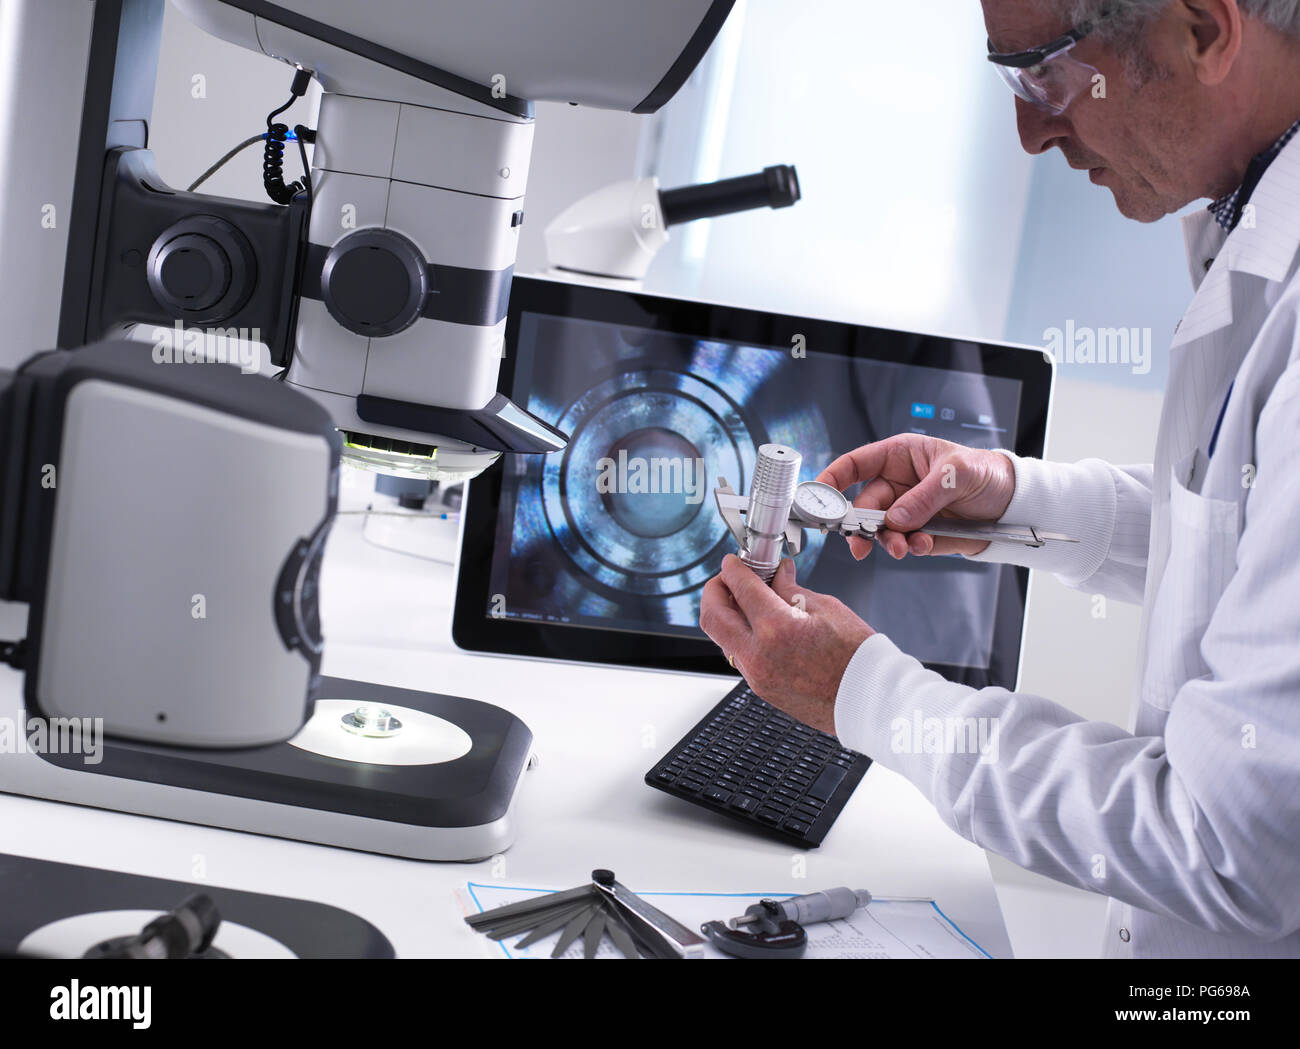 Engineer using a dial calliper and a 3d stereo microscope for quality control in the manufacturing of engineering components for industry Stock Photo